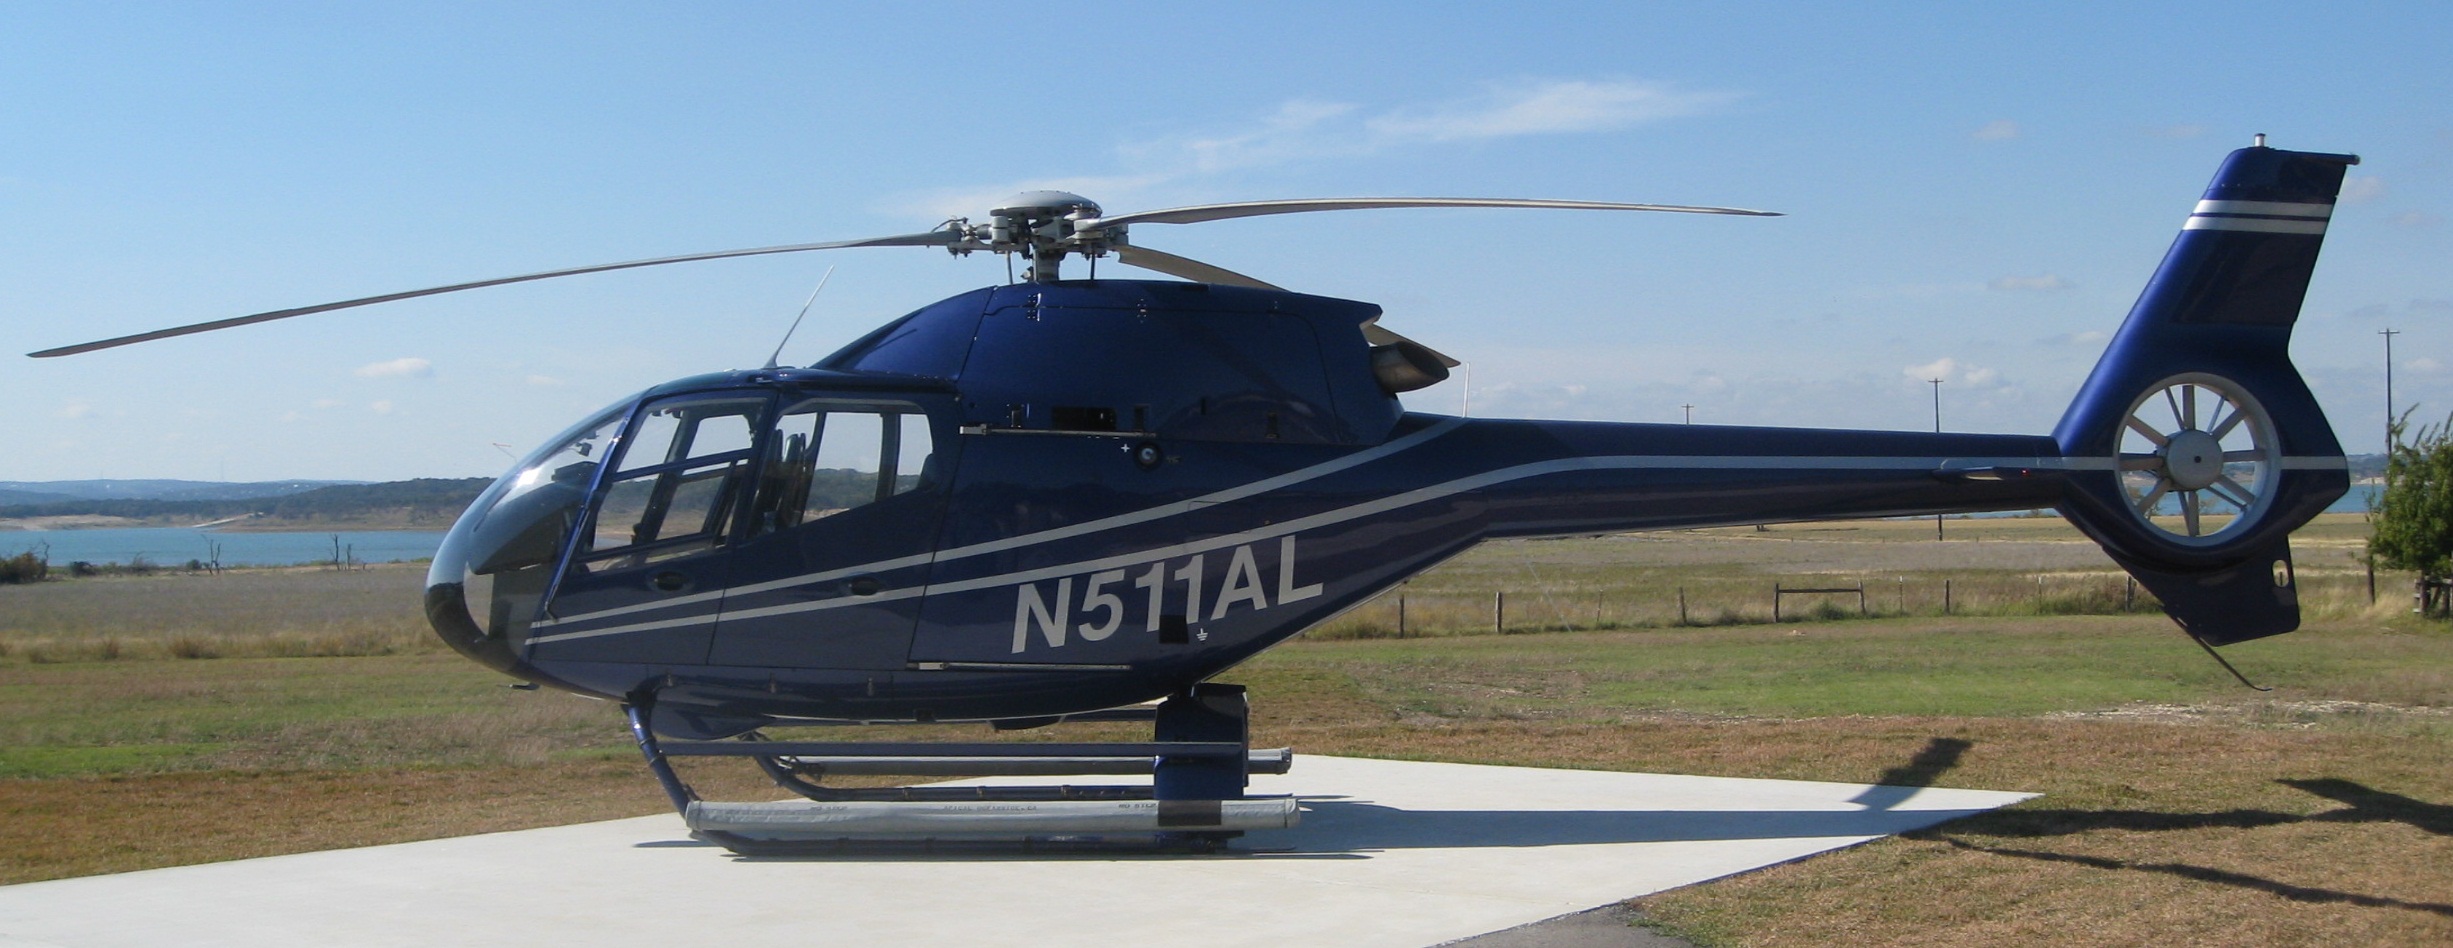 Canyon Lake Helicopter Rides